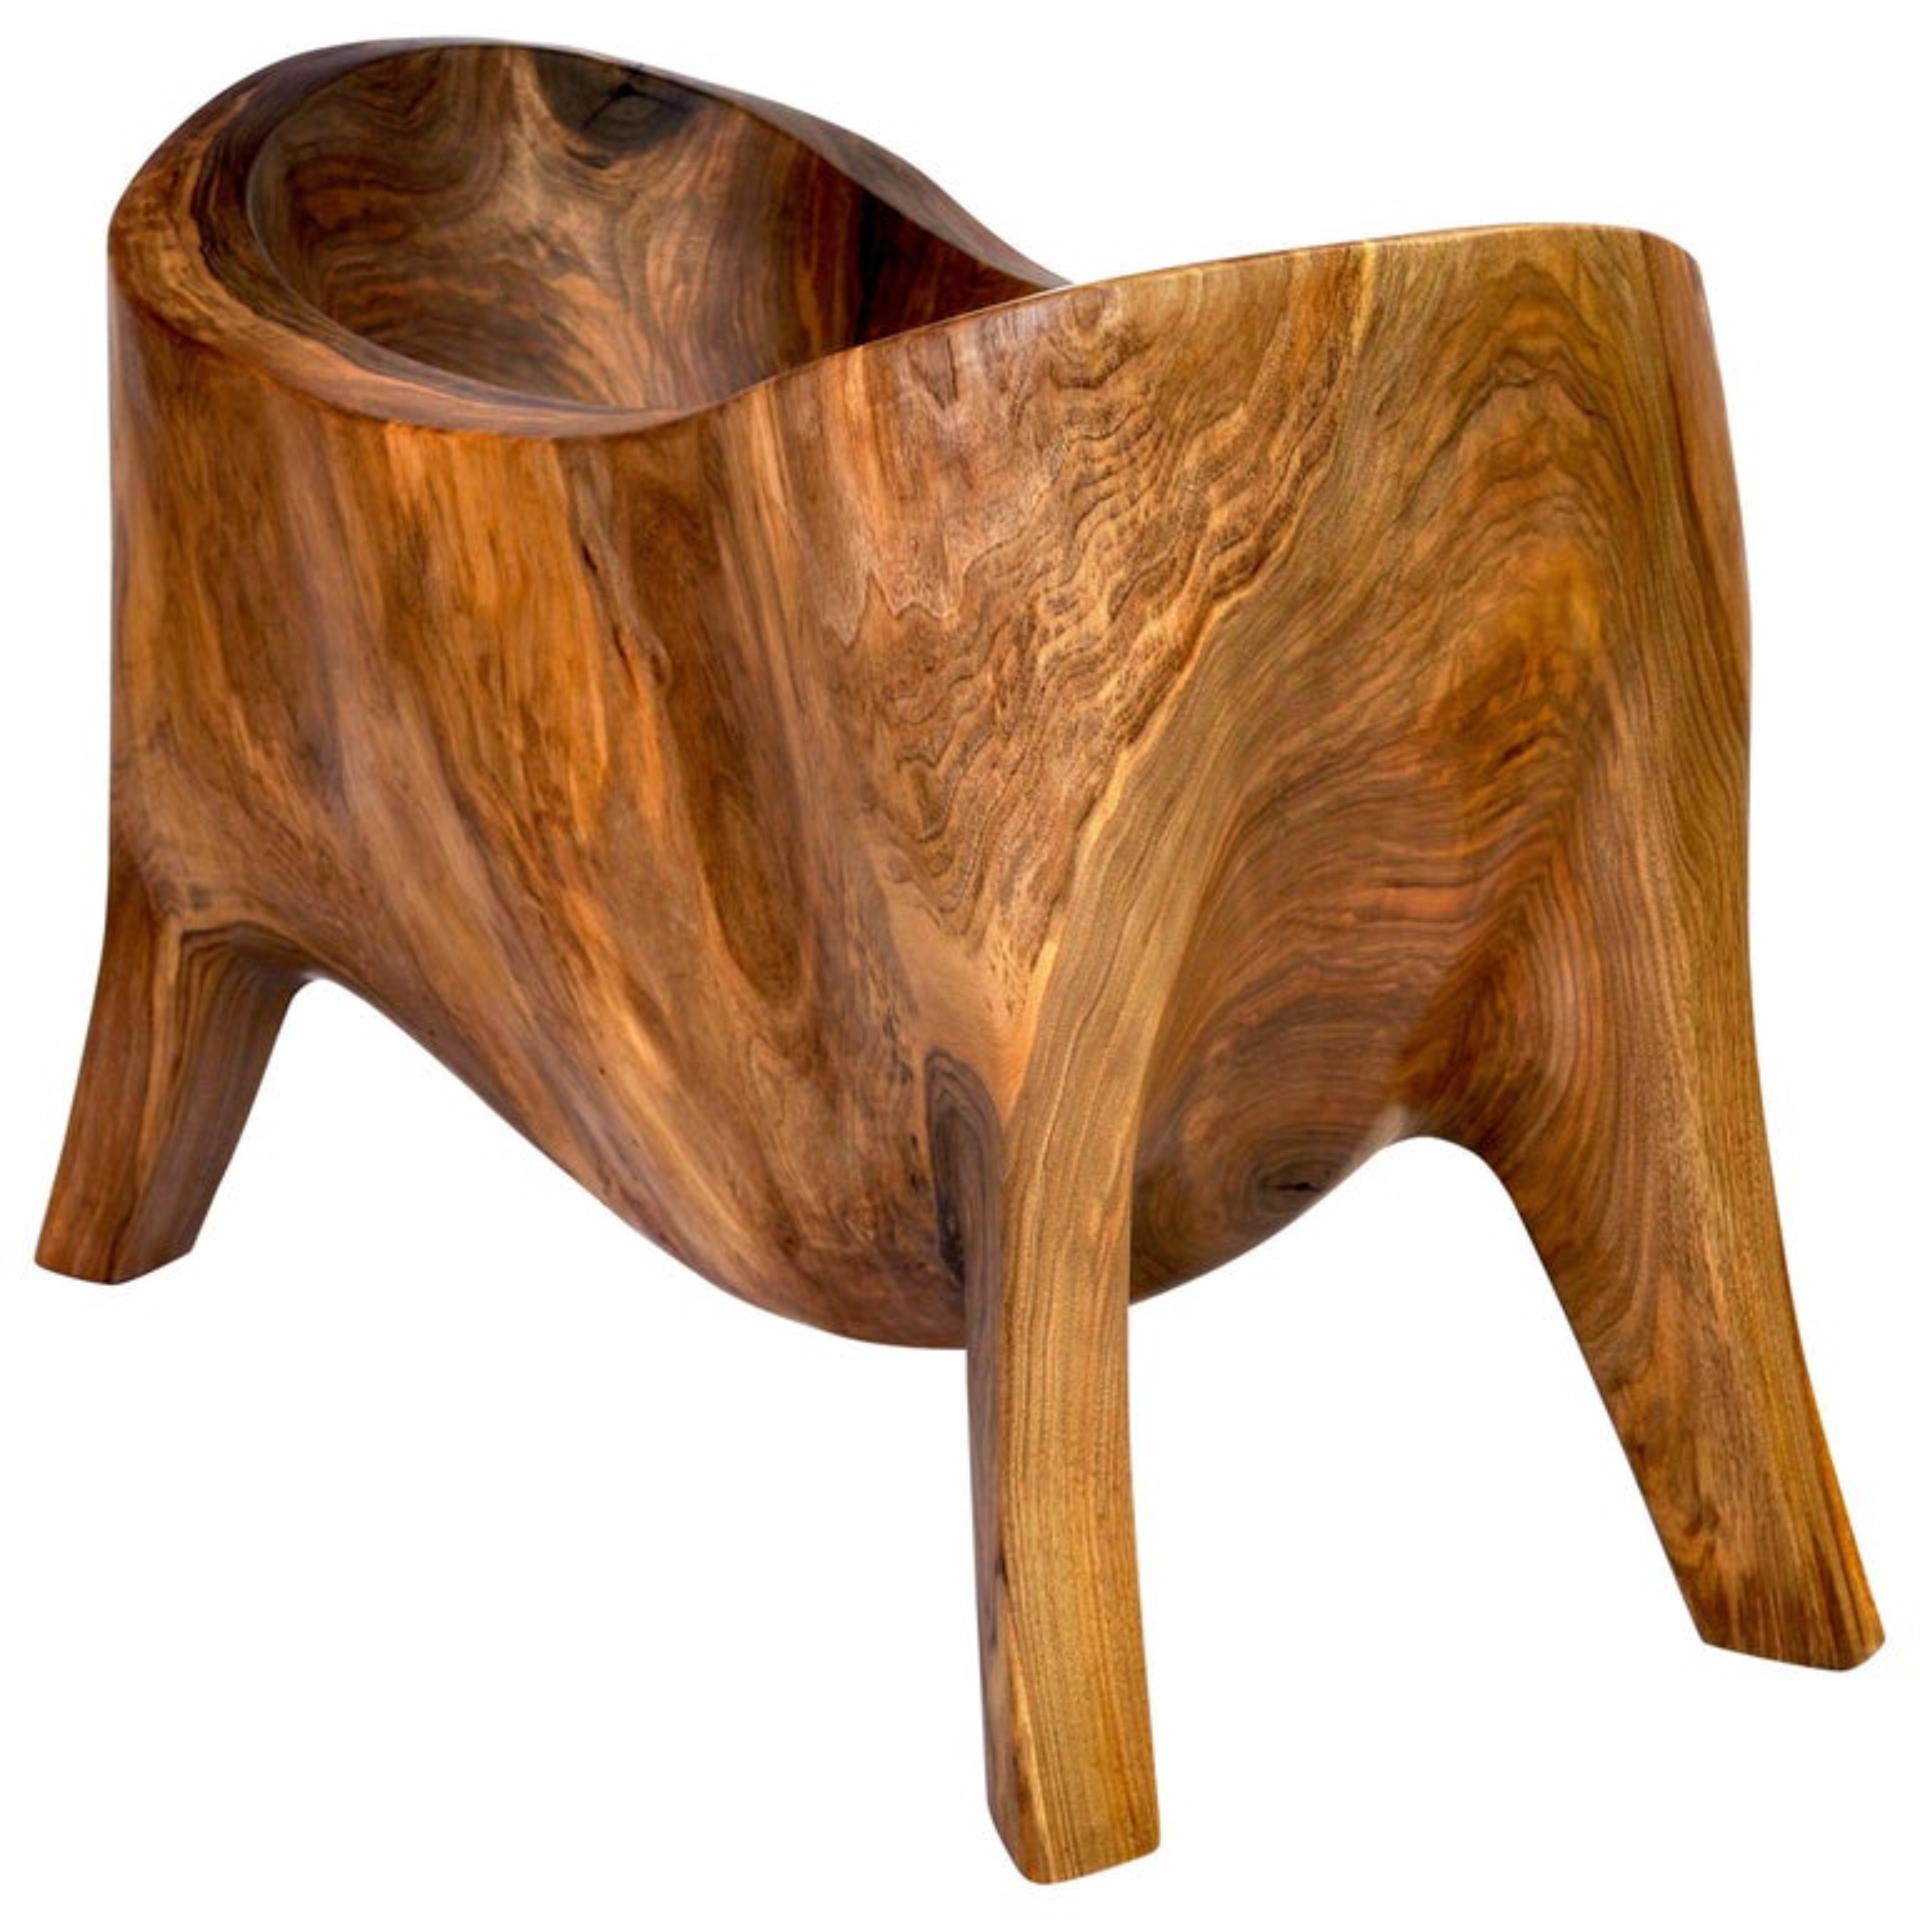 Unique signed bowl by Jörg Pietschmann
Bowl walnut
Measures: H 73 x W 108 x D 60 cm
Crafted from a huge very old European walnut tree. Polished oil finish.

In Pietschmann’s sculptures, trees that for centuries were part of a landscape and founded